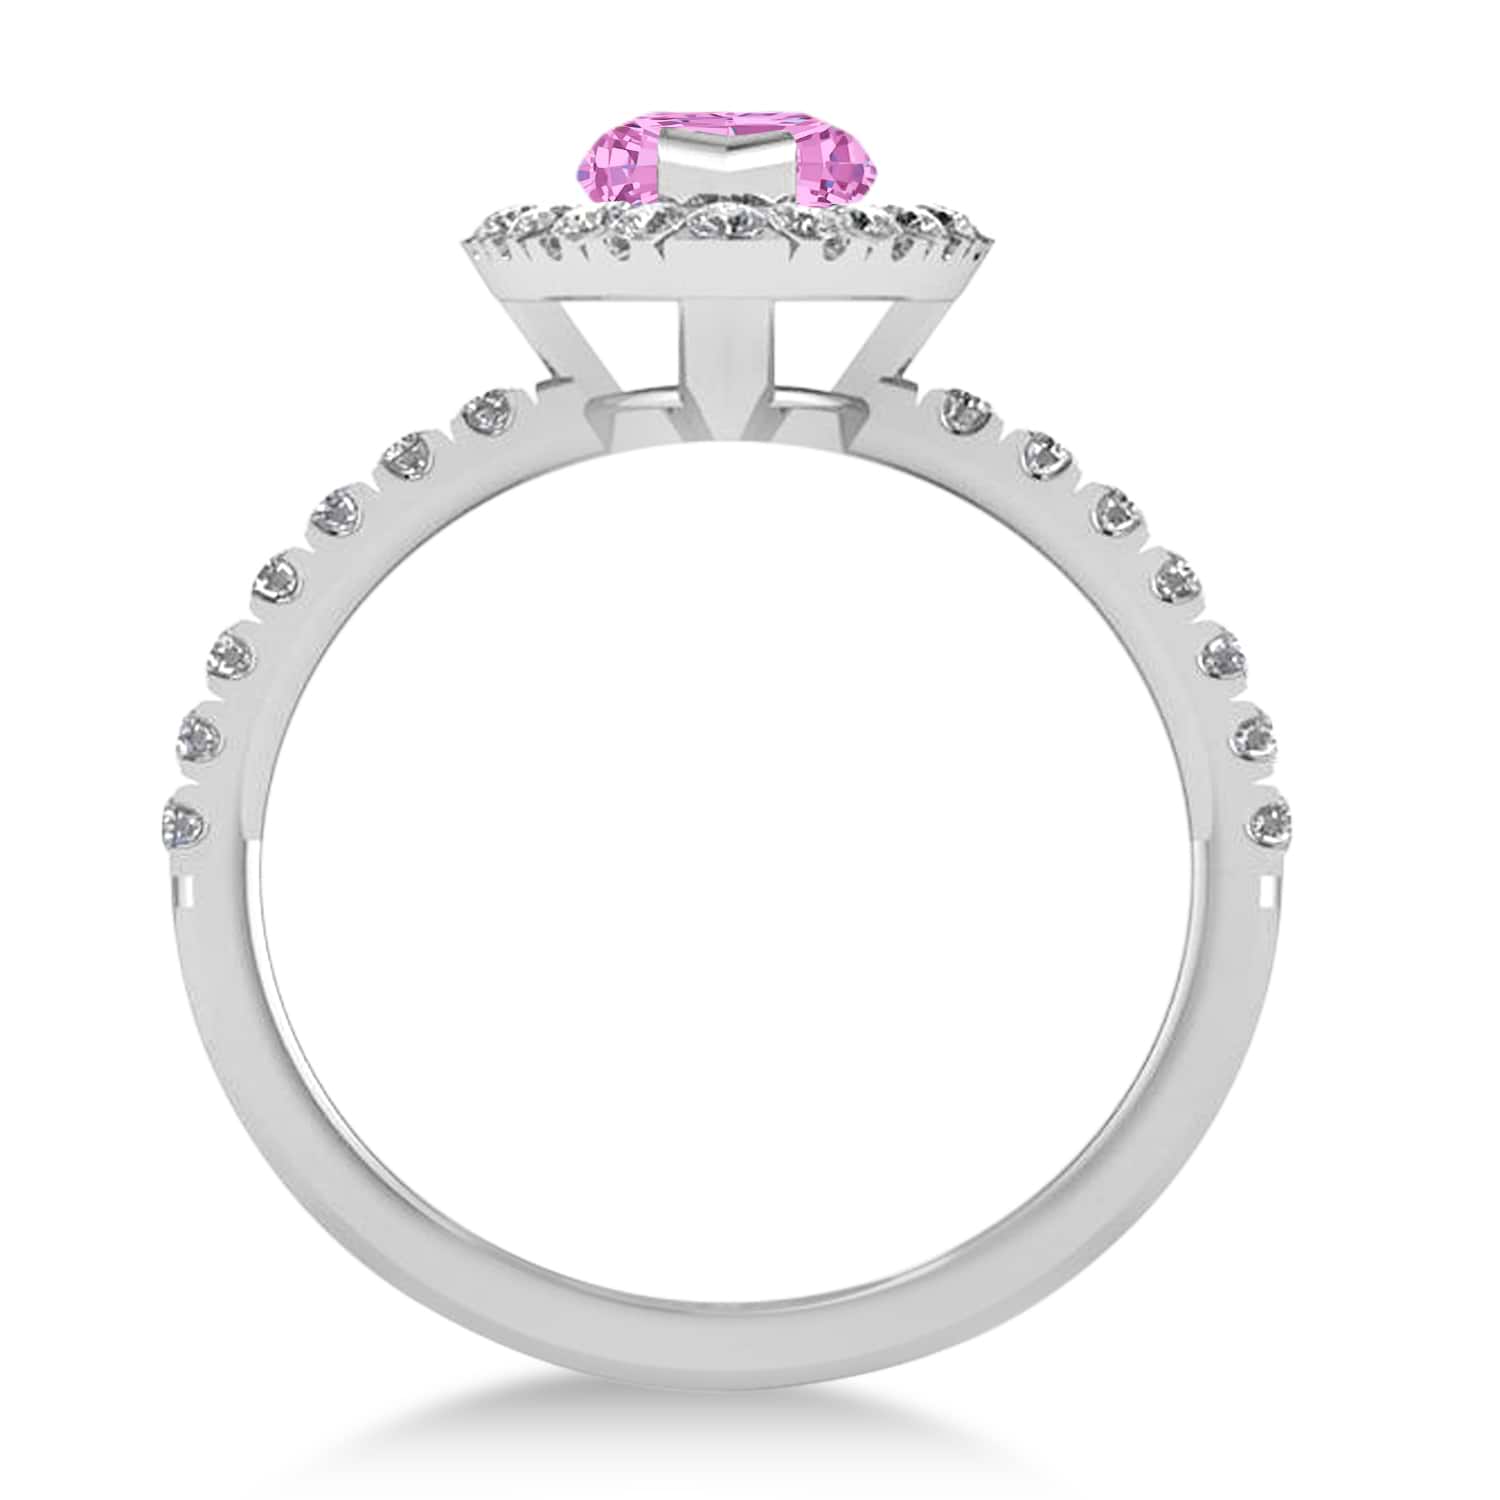 Pink Sapphire & Diamond Marquise Halo Engagement Ring 14k White Gold (1.84ct)